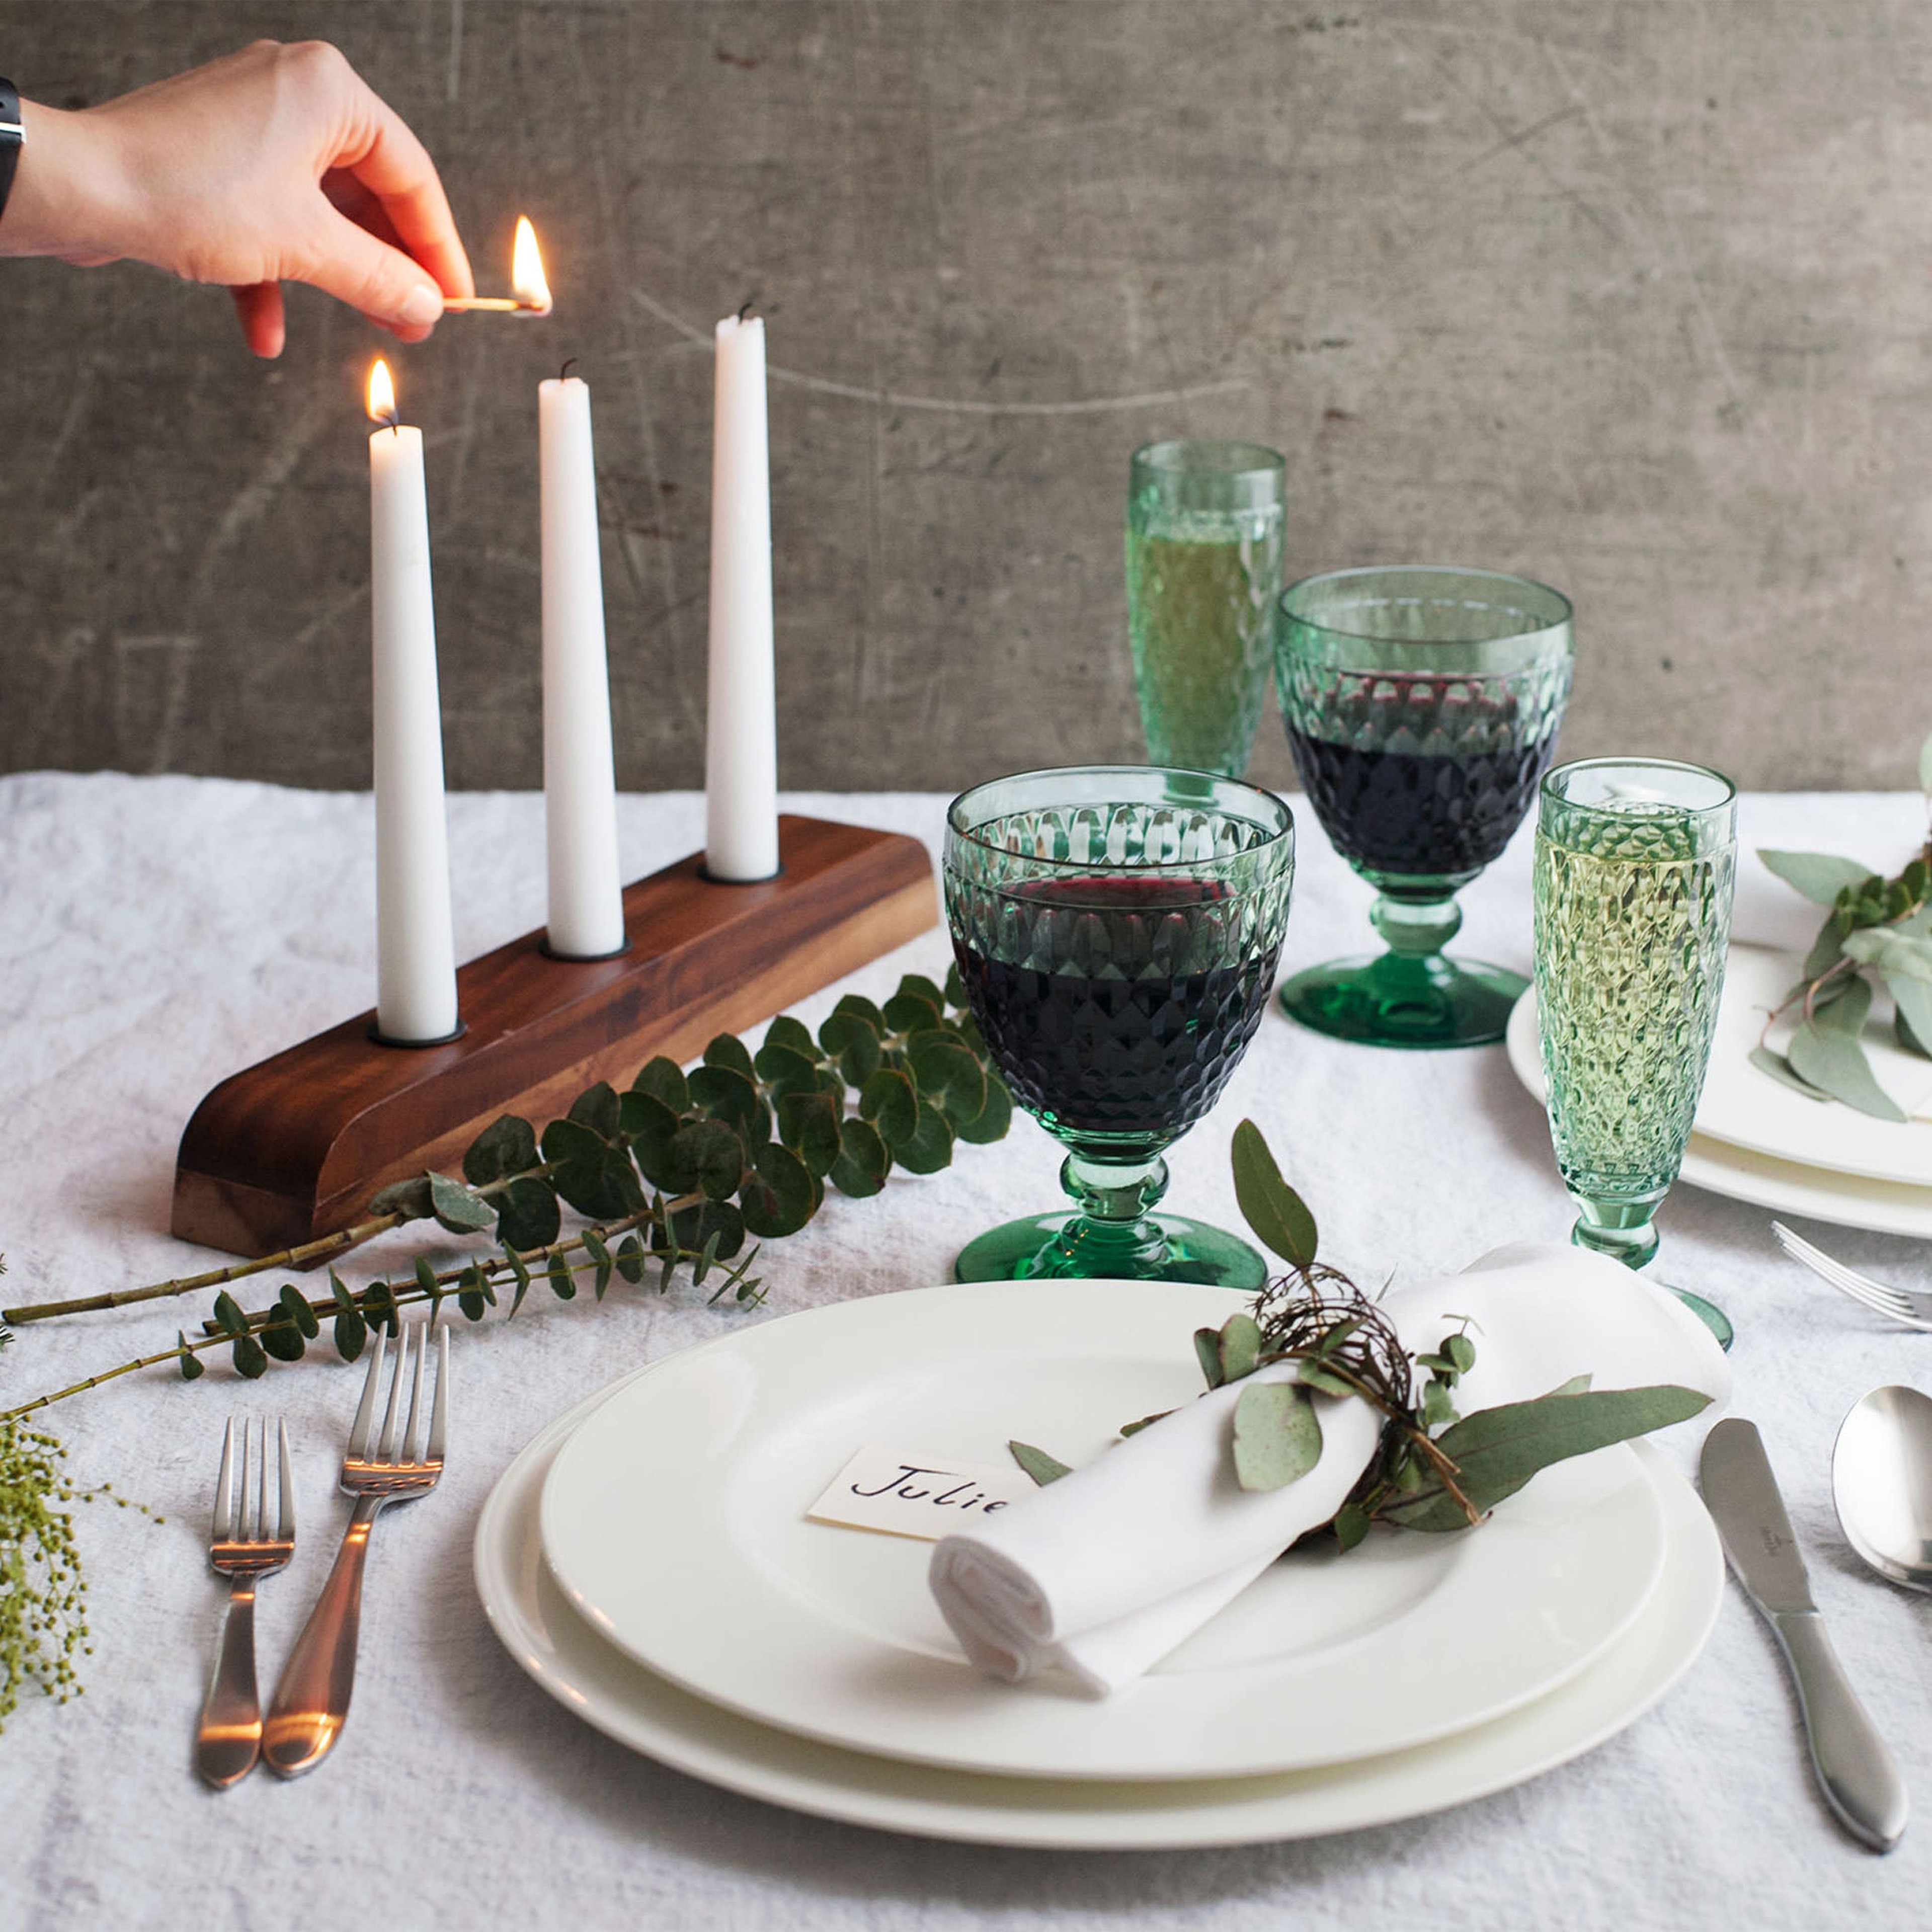 3 Merry Ways to Set a Holiday Table